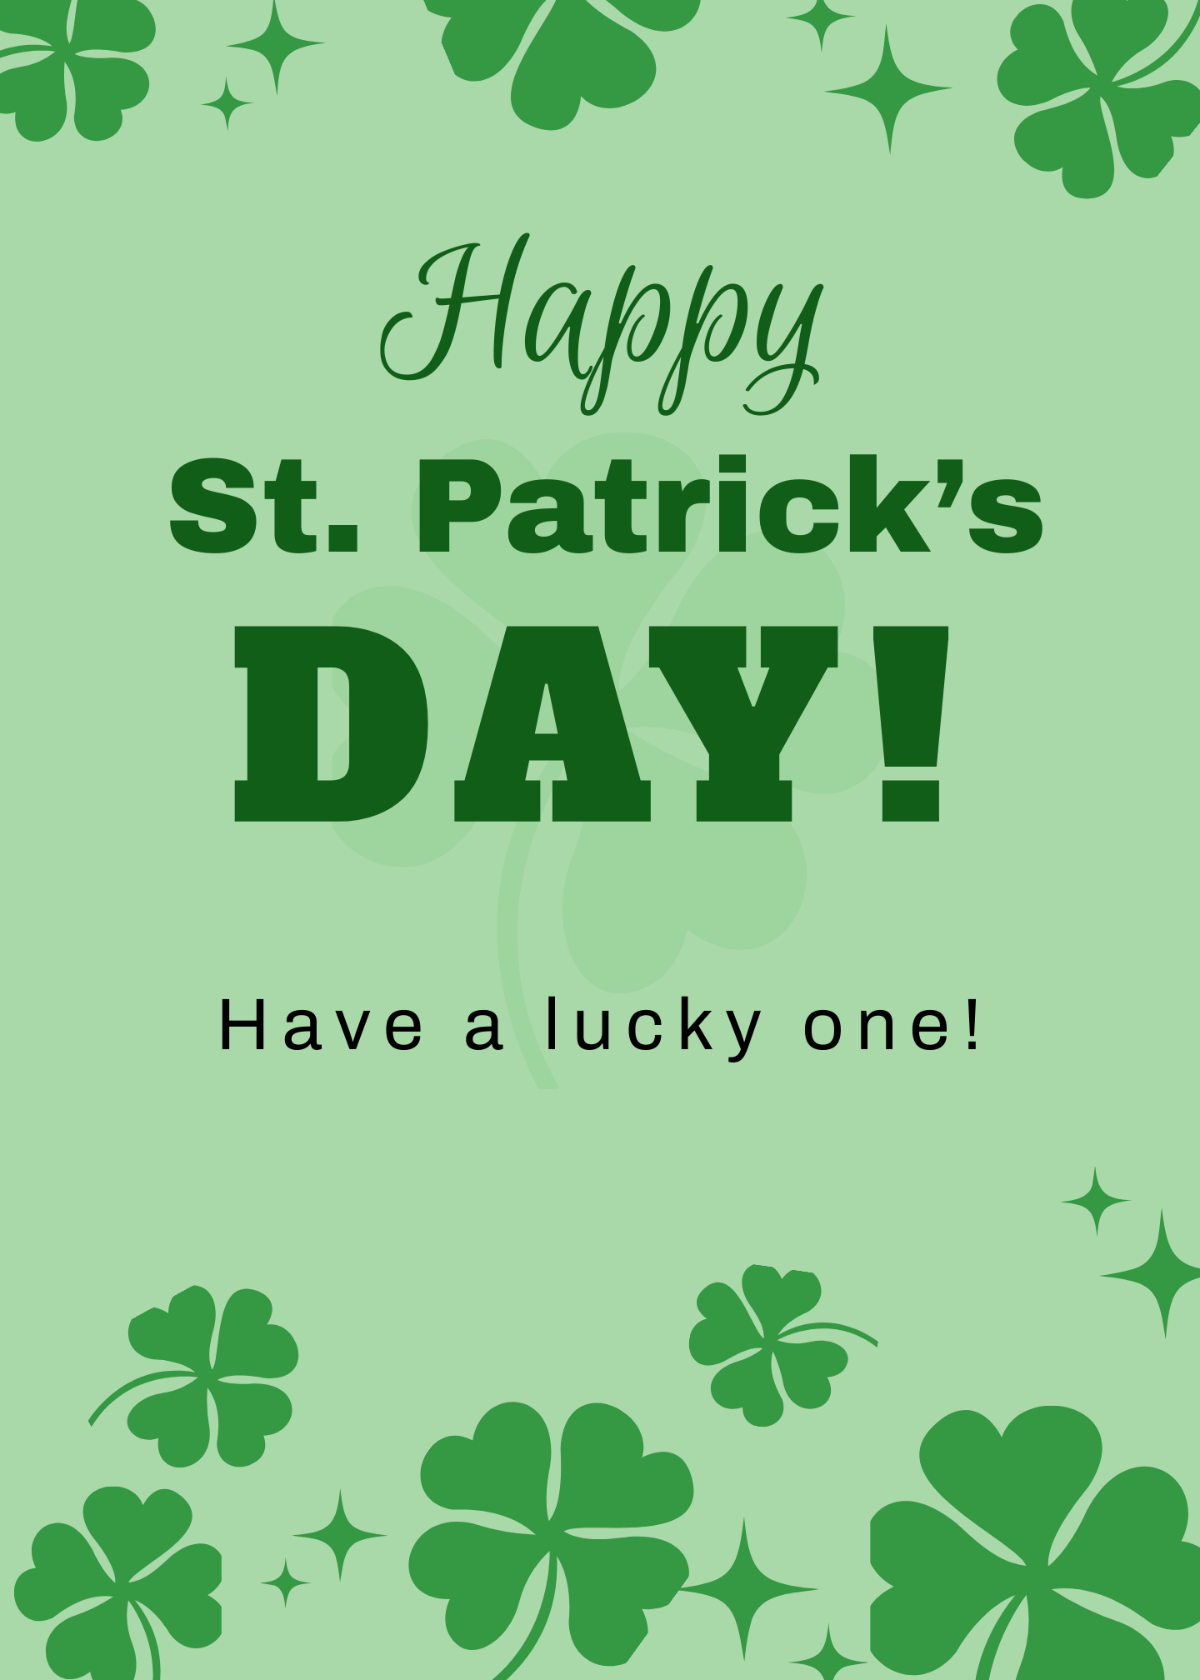 St. Patrick's Day Greeting Template